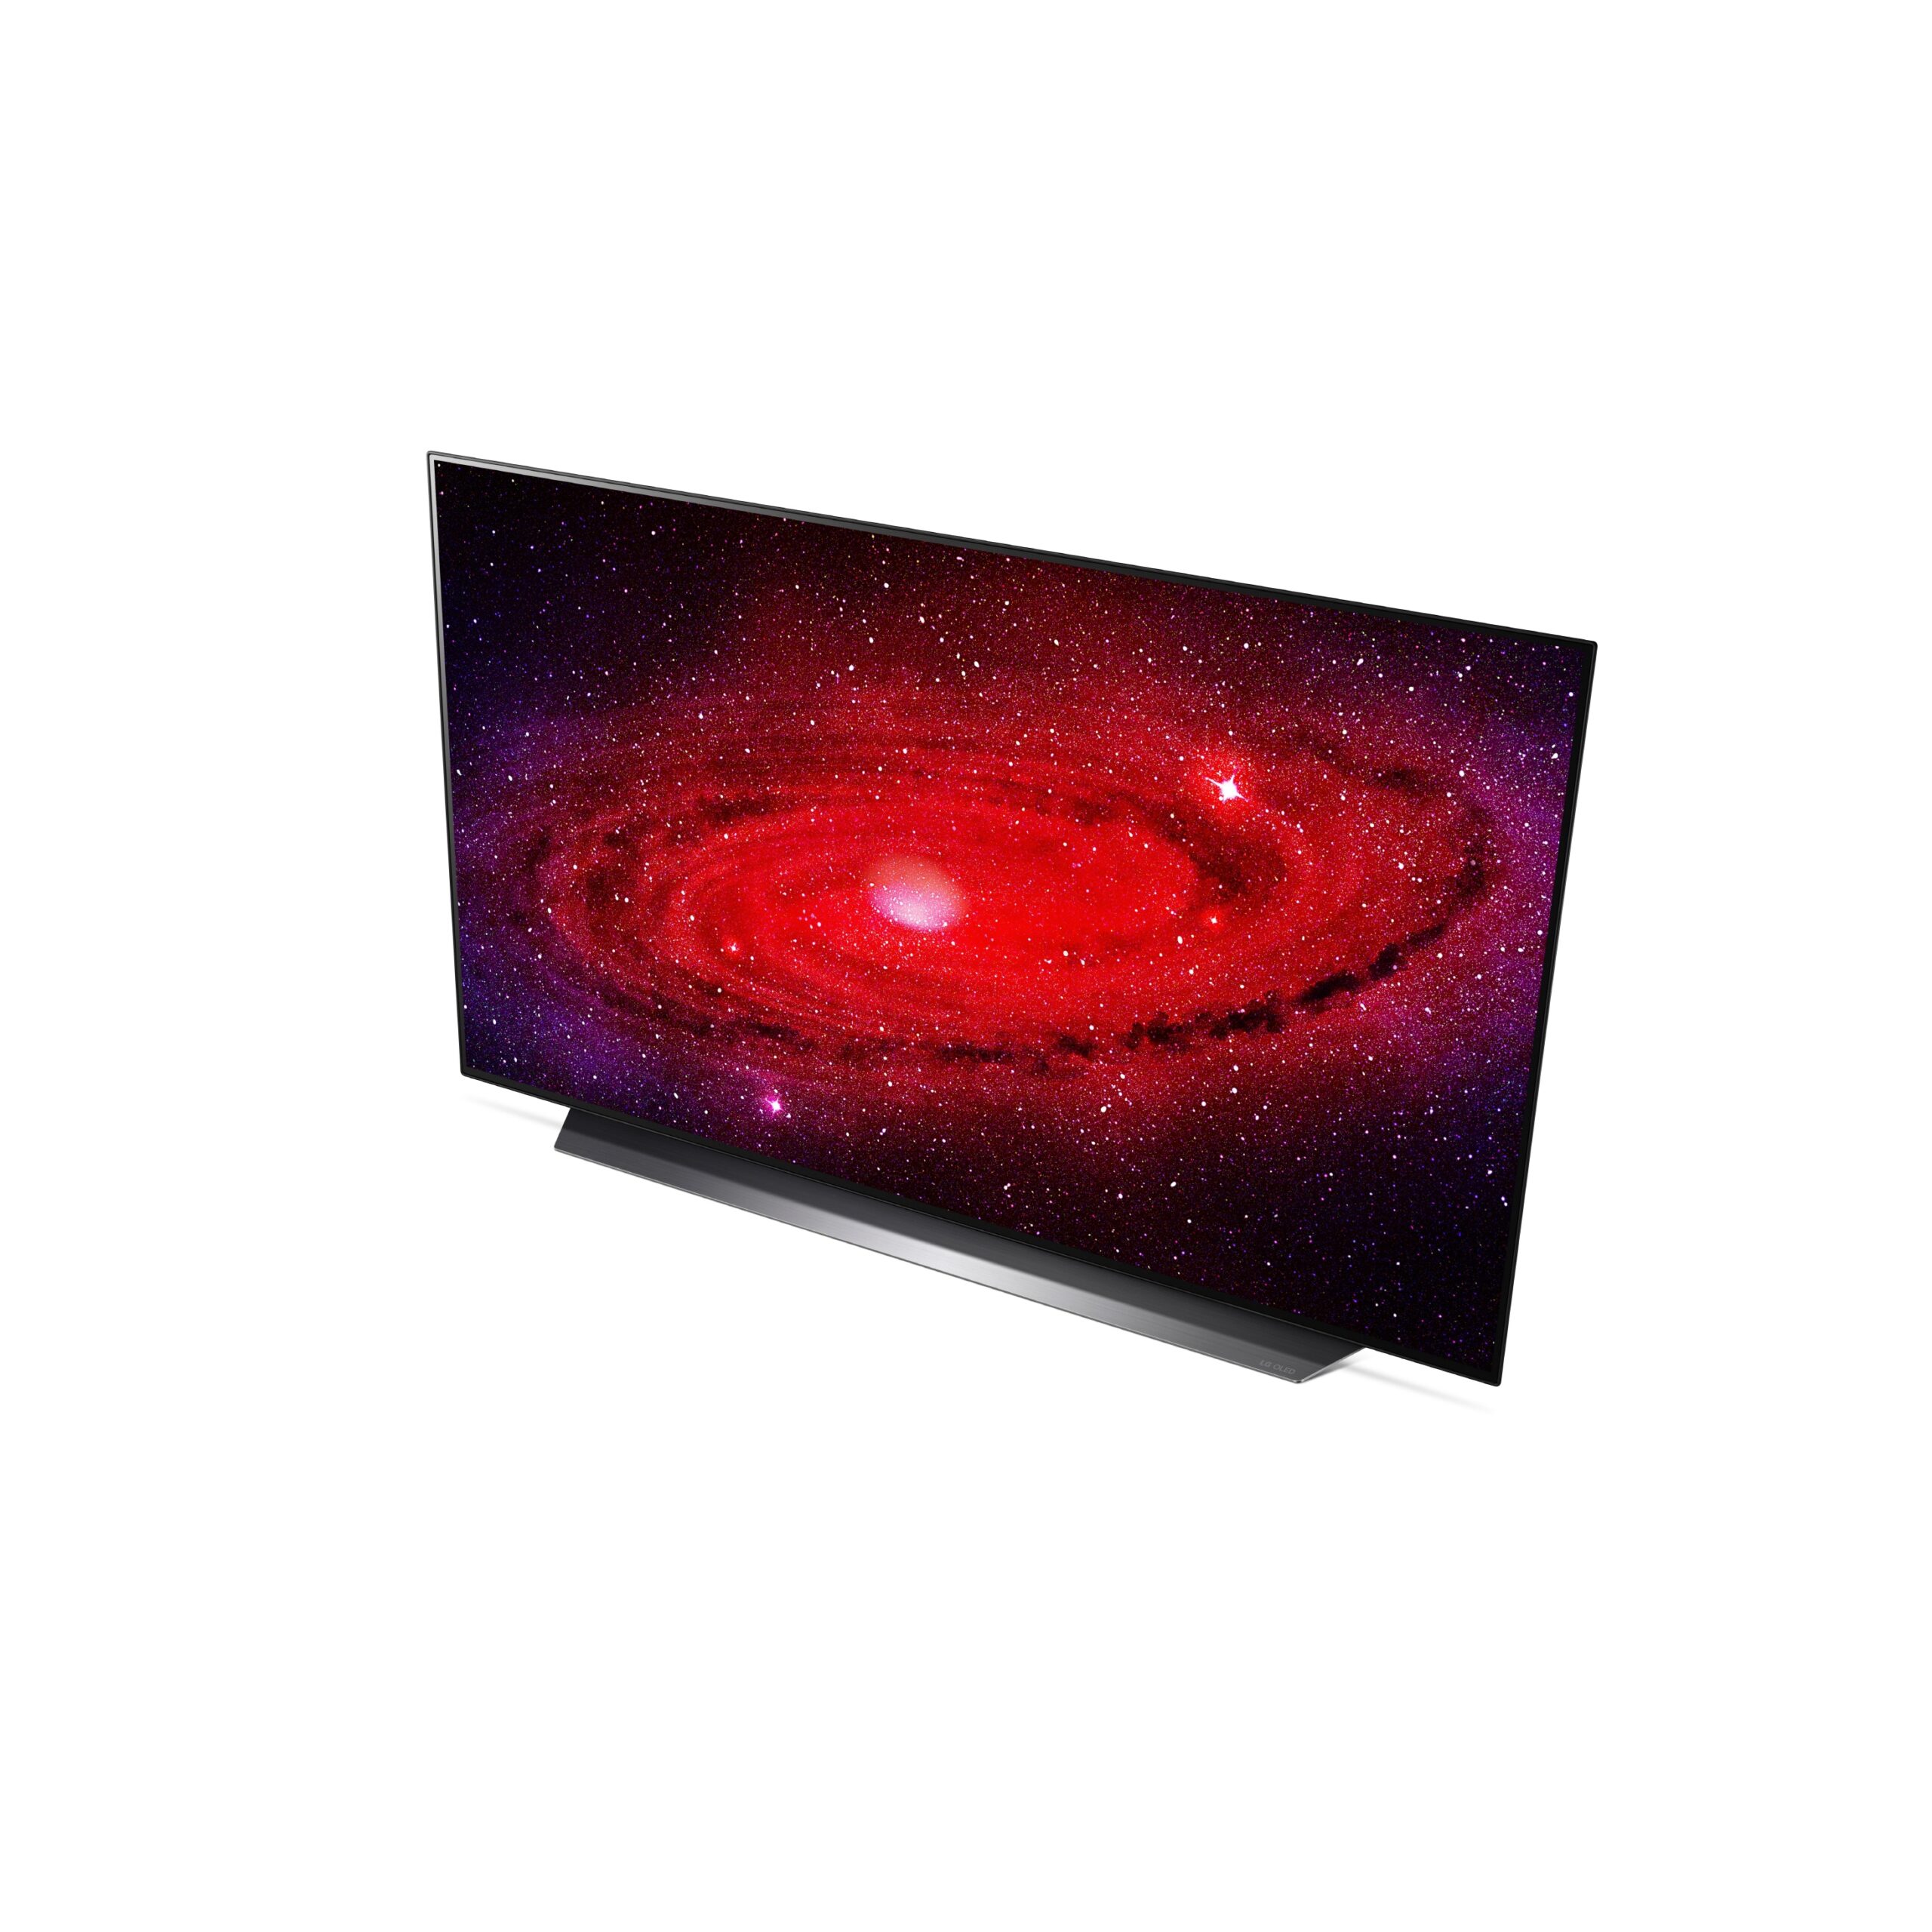 Right side view of LG’s 48-inch OLED TV displaying a galaxy in extreme detail with powerful reds and purples